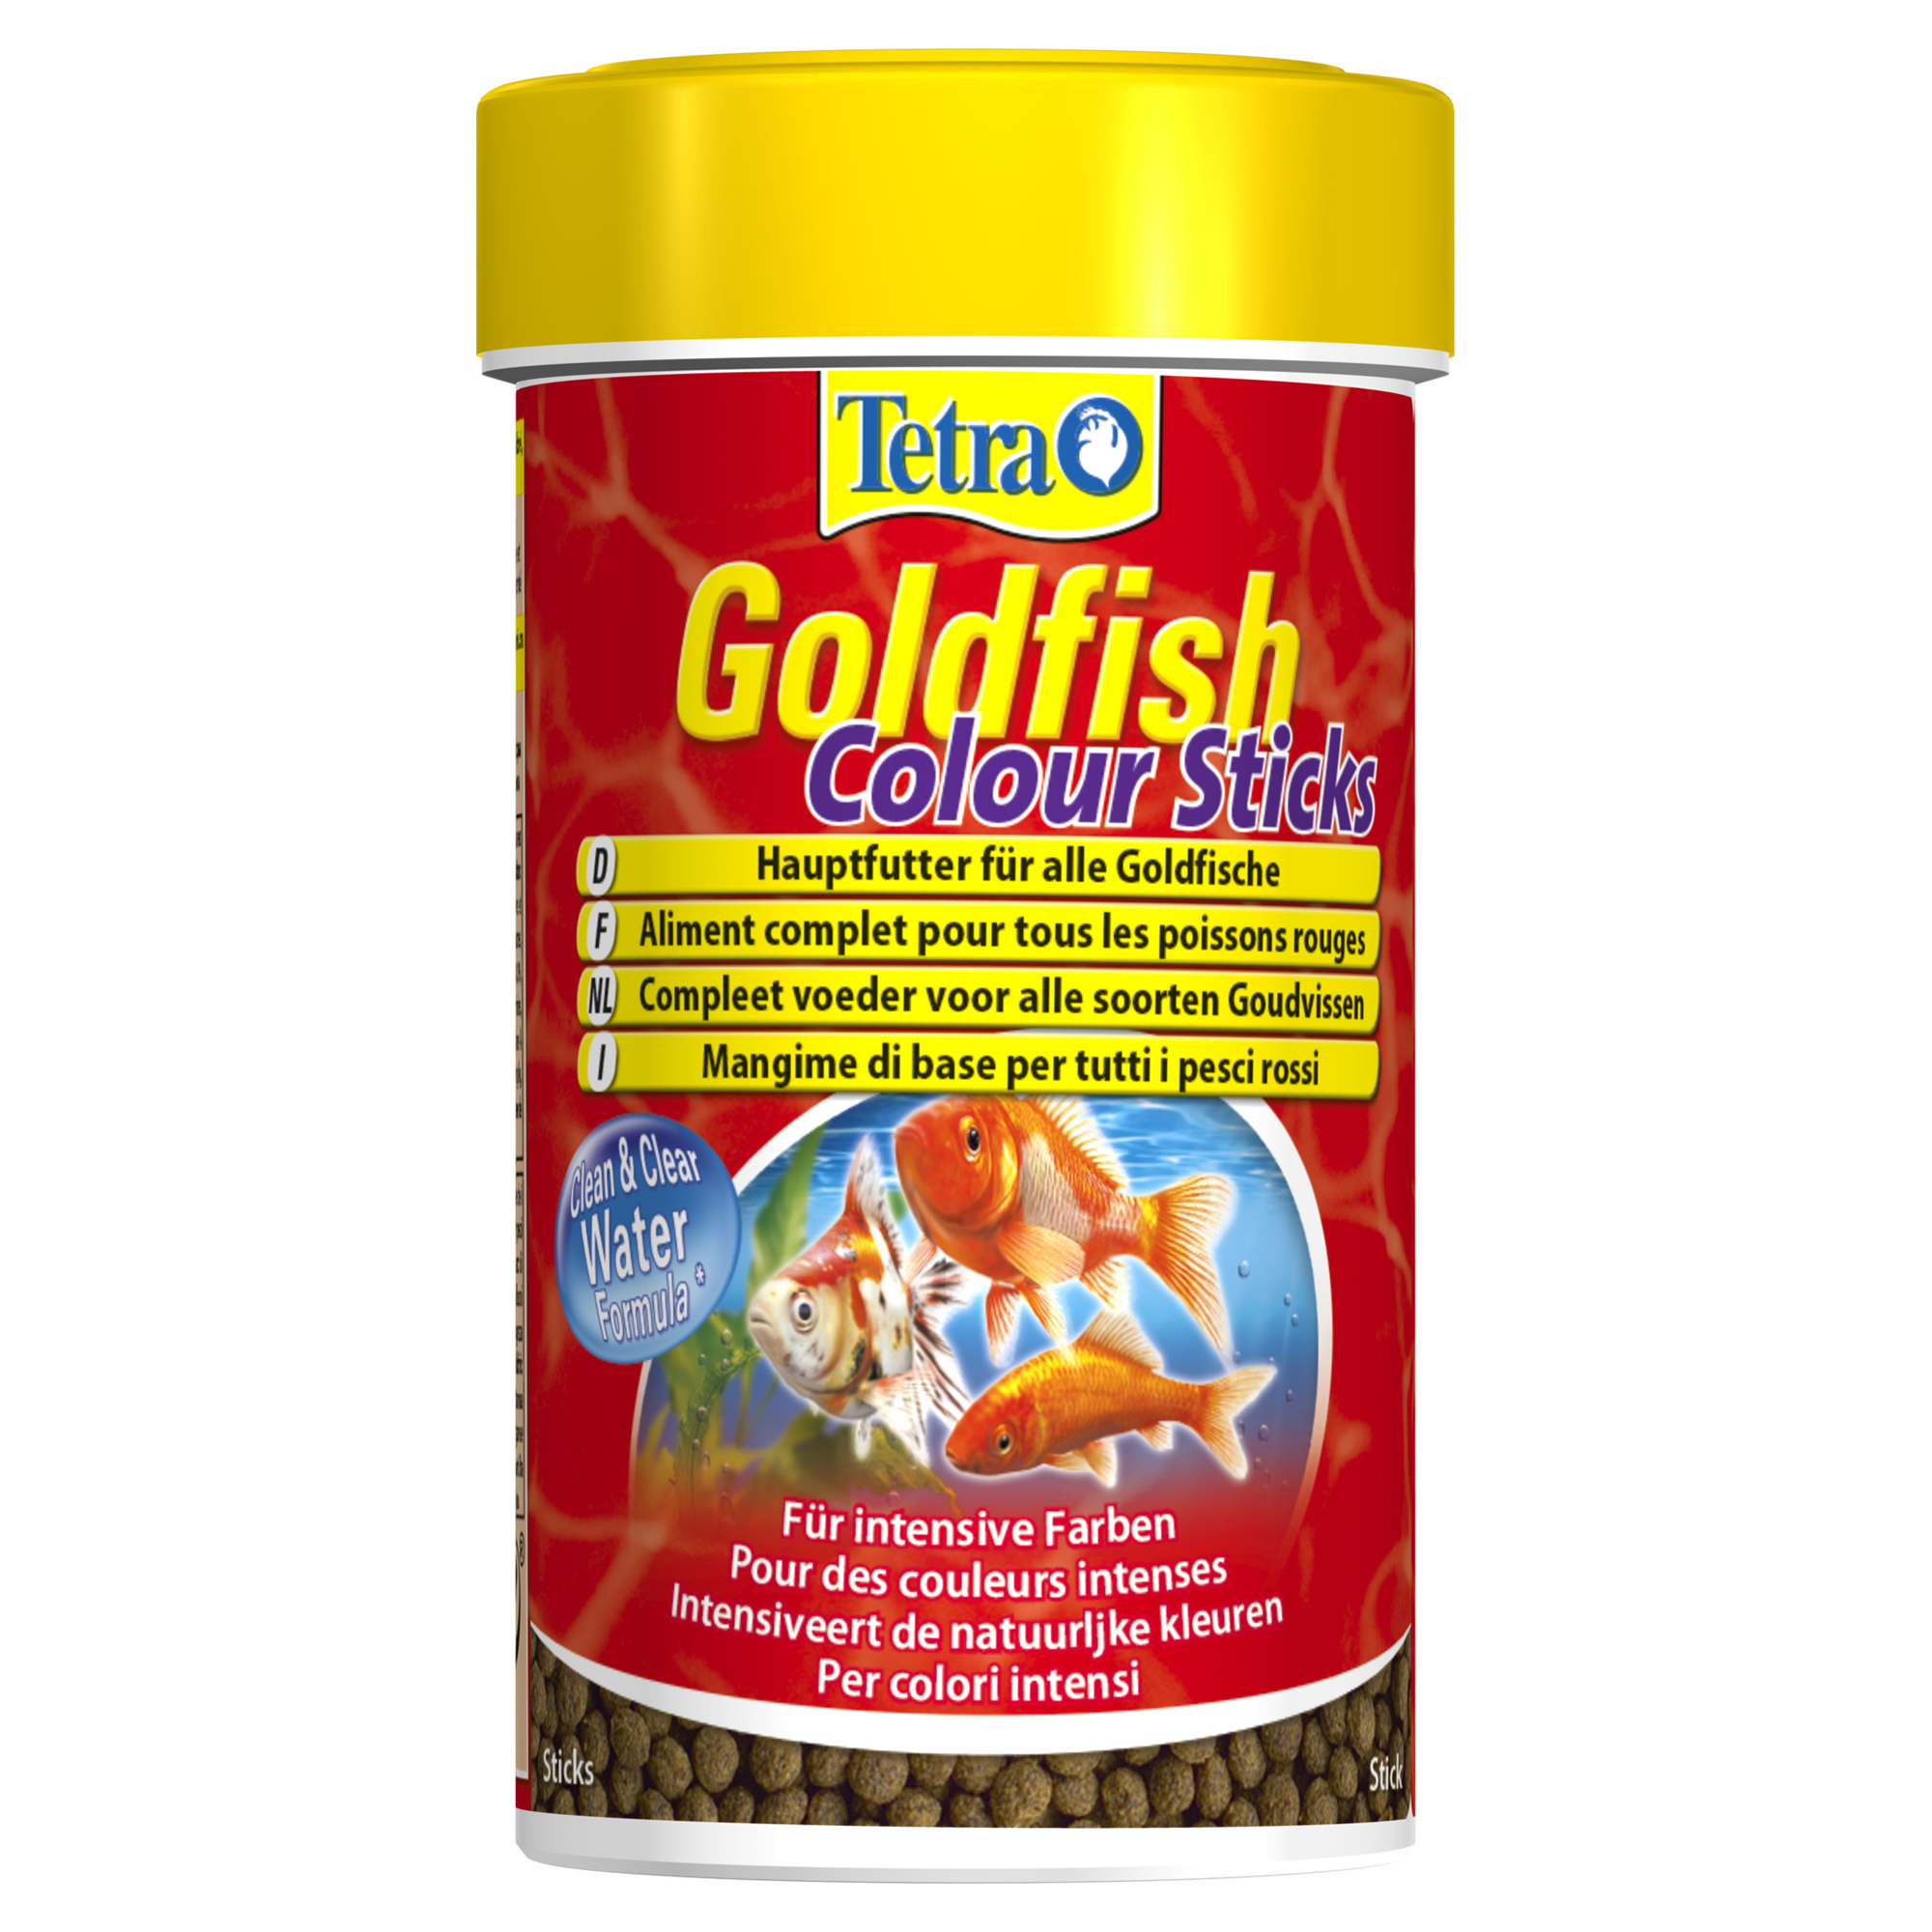 Fischfutter Goldfish Colour Sticks 30 g + product picture